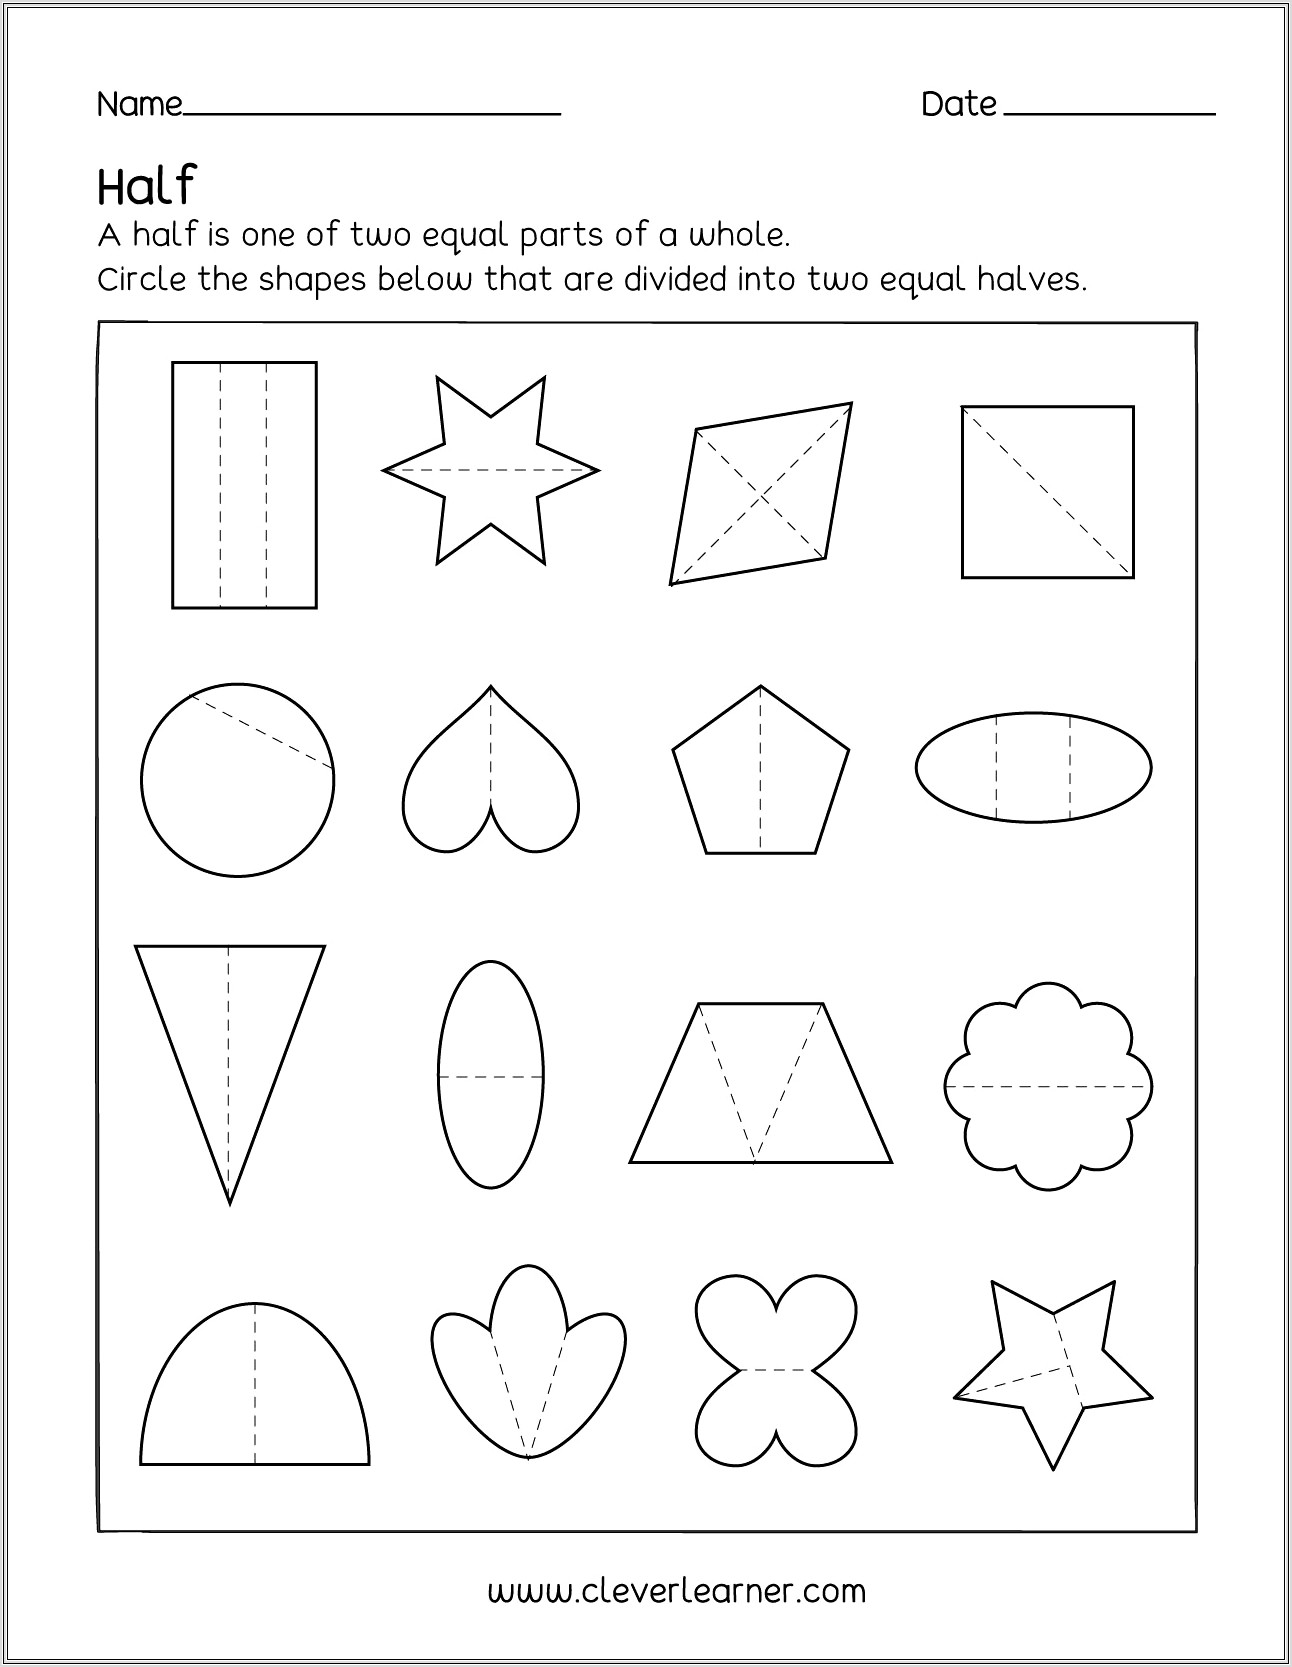 Halves And Mixed Numbers Worksheet